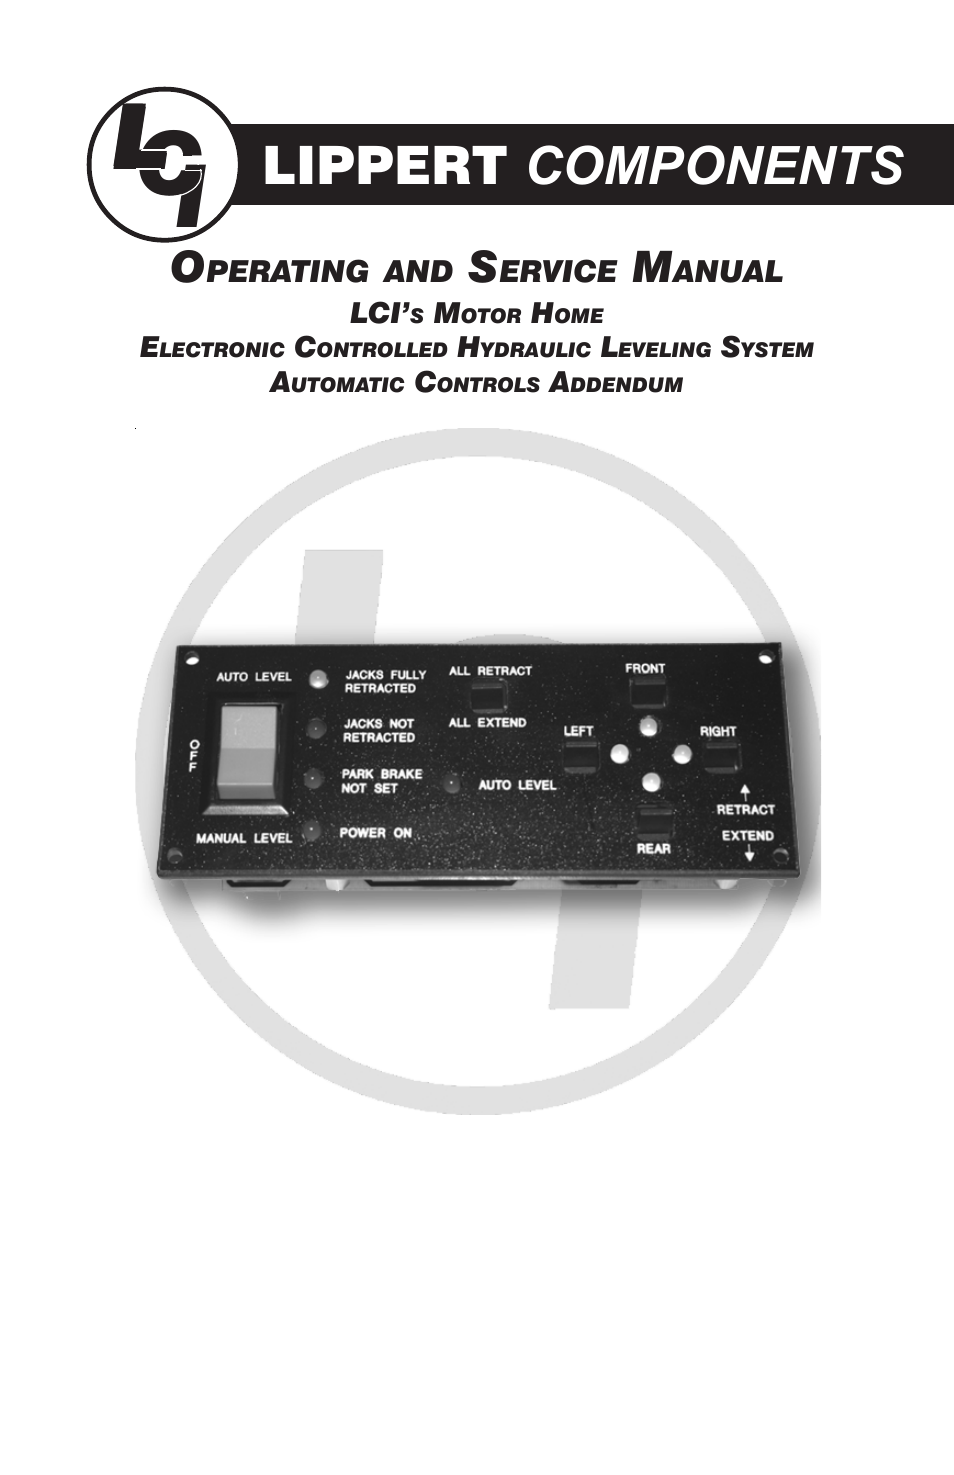 LCI’s Motor Home Electronic Controlled Hydraulic Leveling System Automatic Controls Addendum